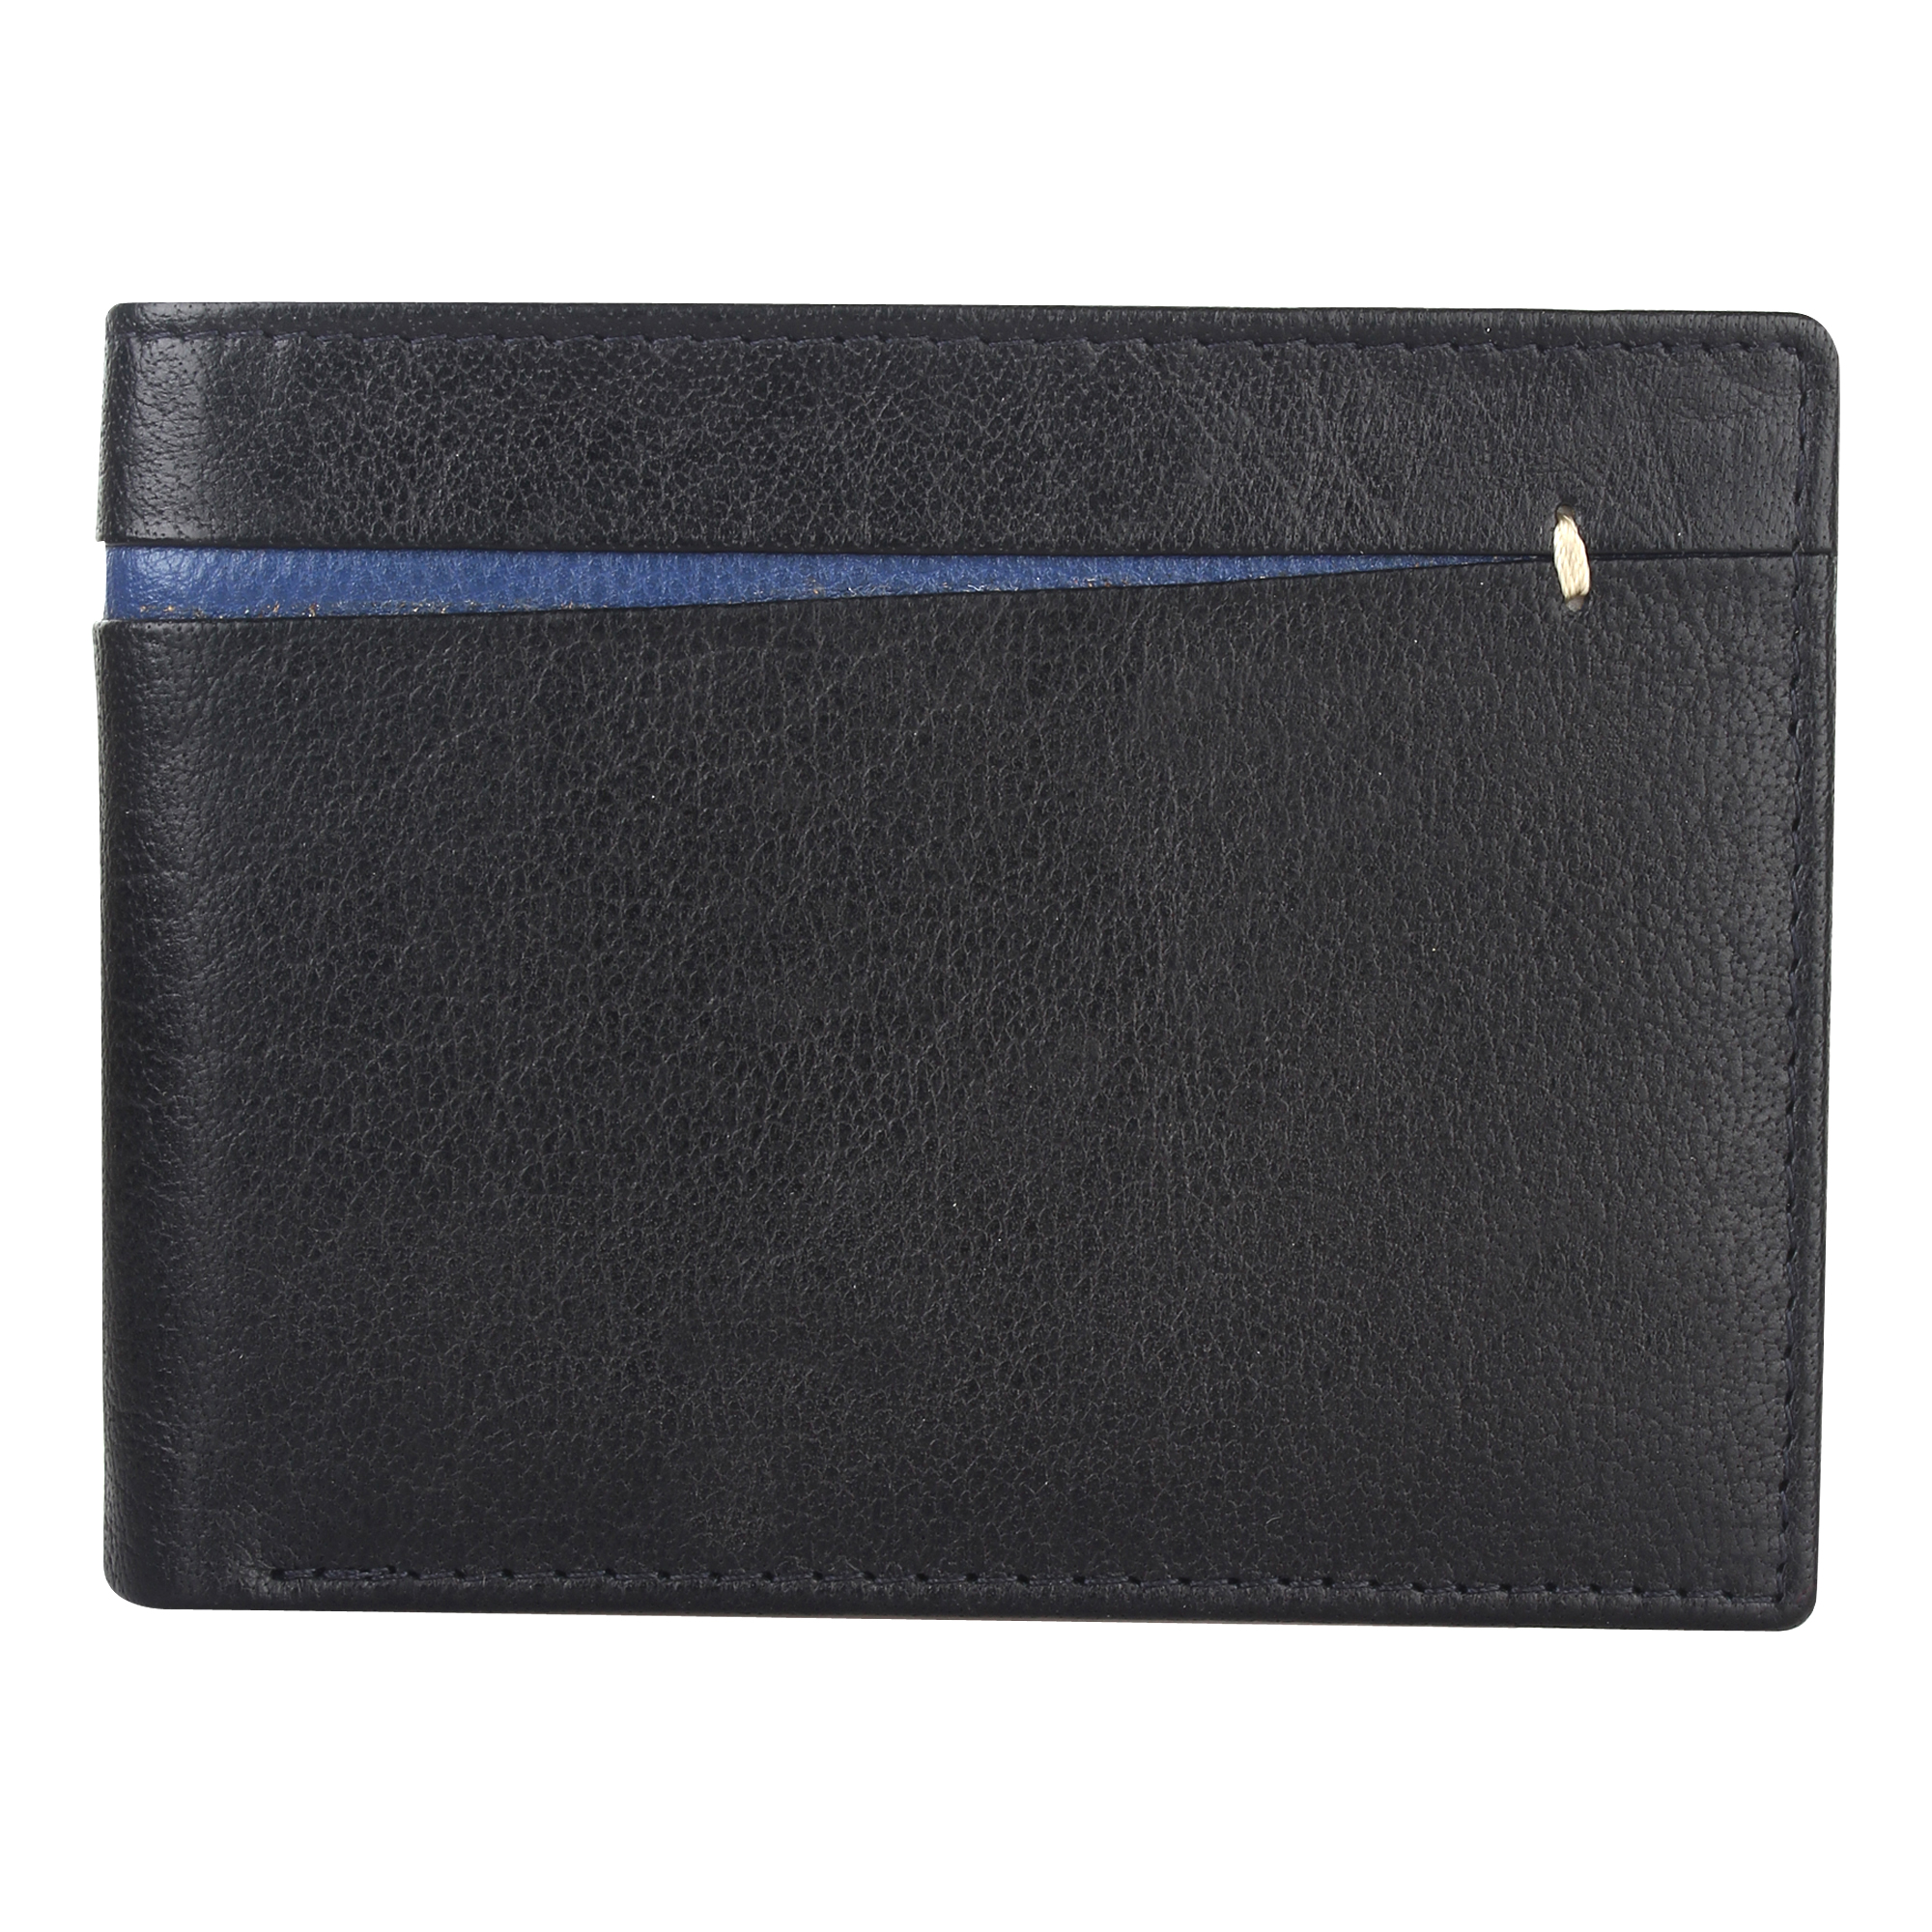 Leather Wallets Manufacturers in Mexico, Leather Wallets Suppliers in Mexico, Leather Wallets Wholesalers in Mexico, Leather Wallets Traders in Mexico 